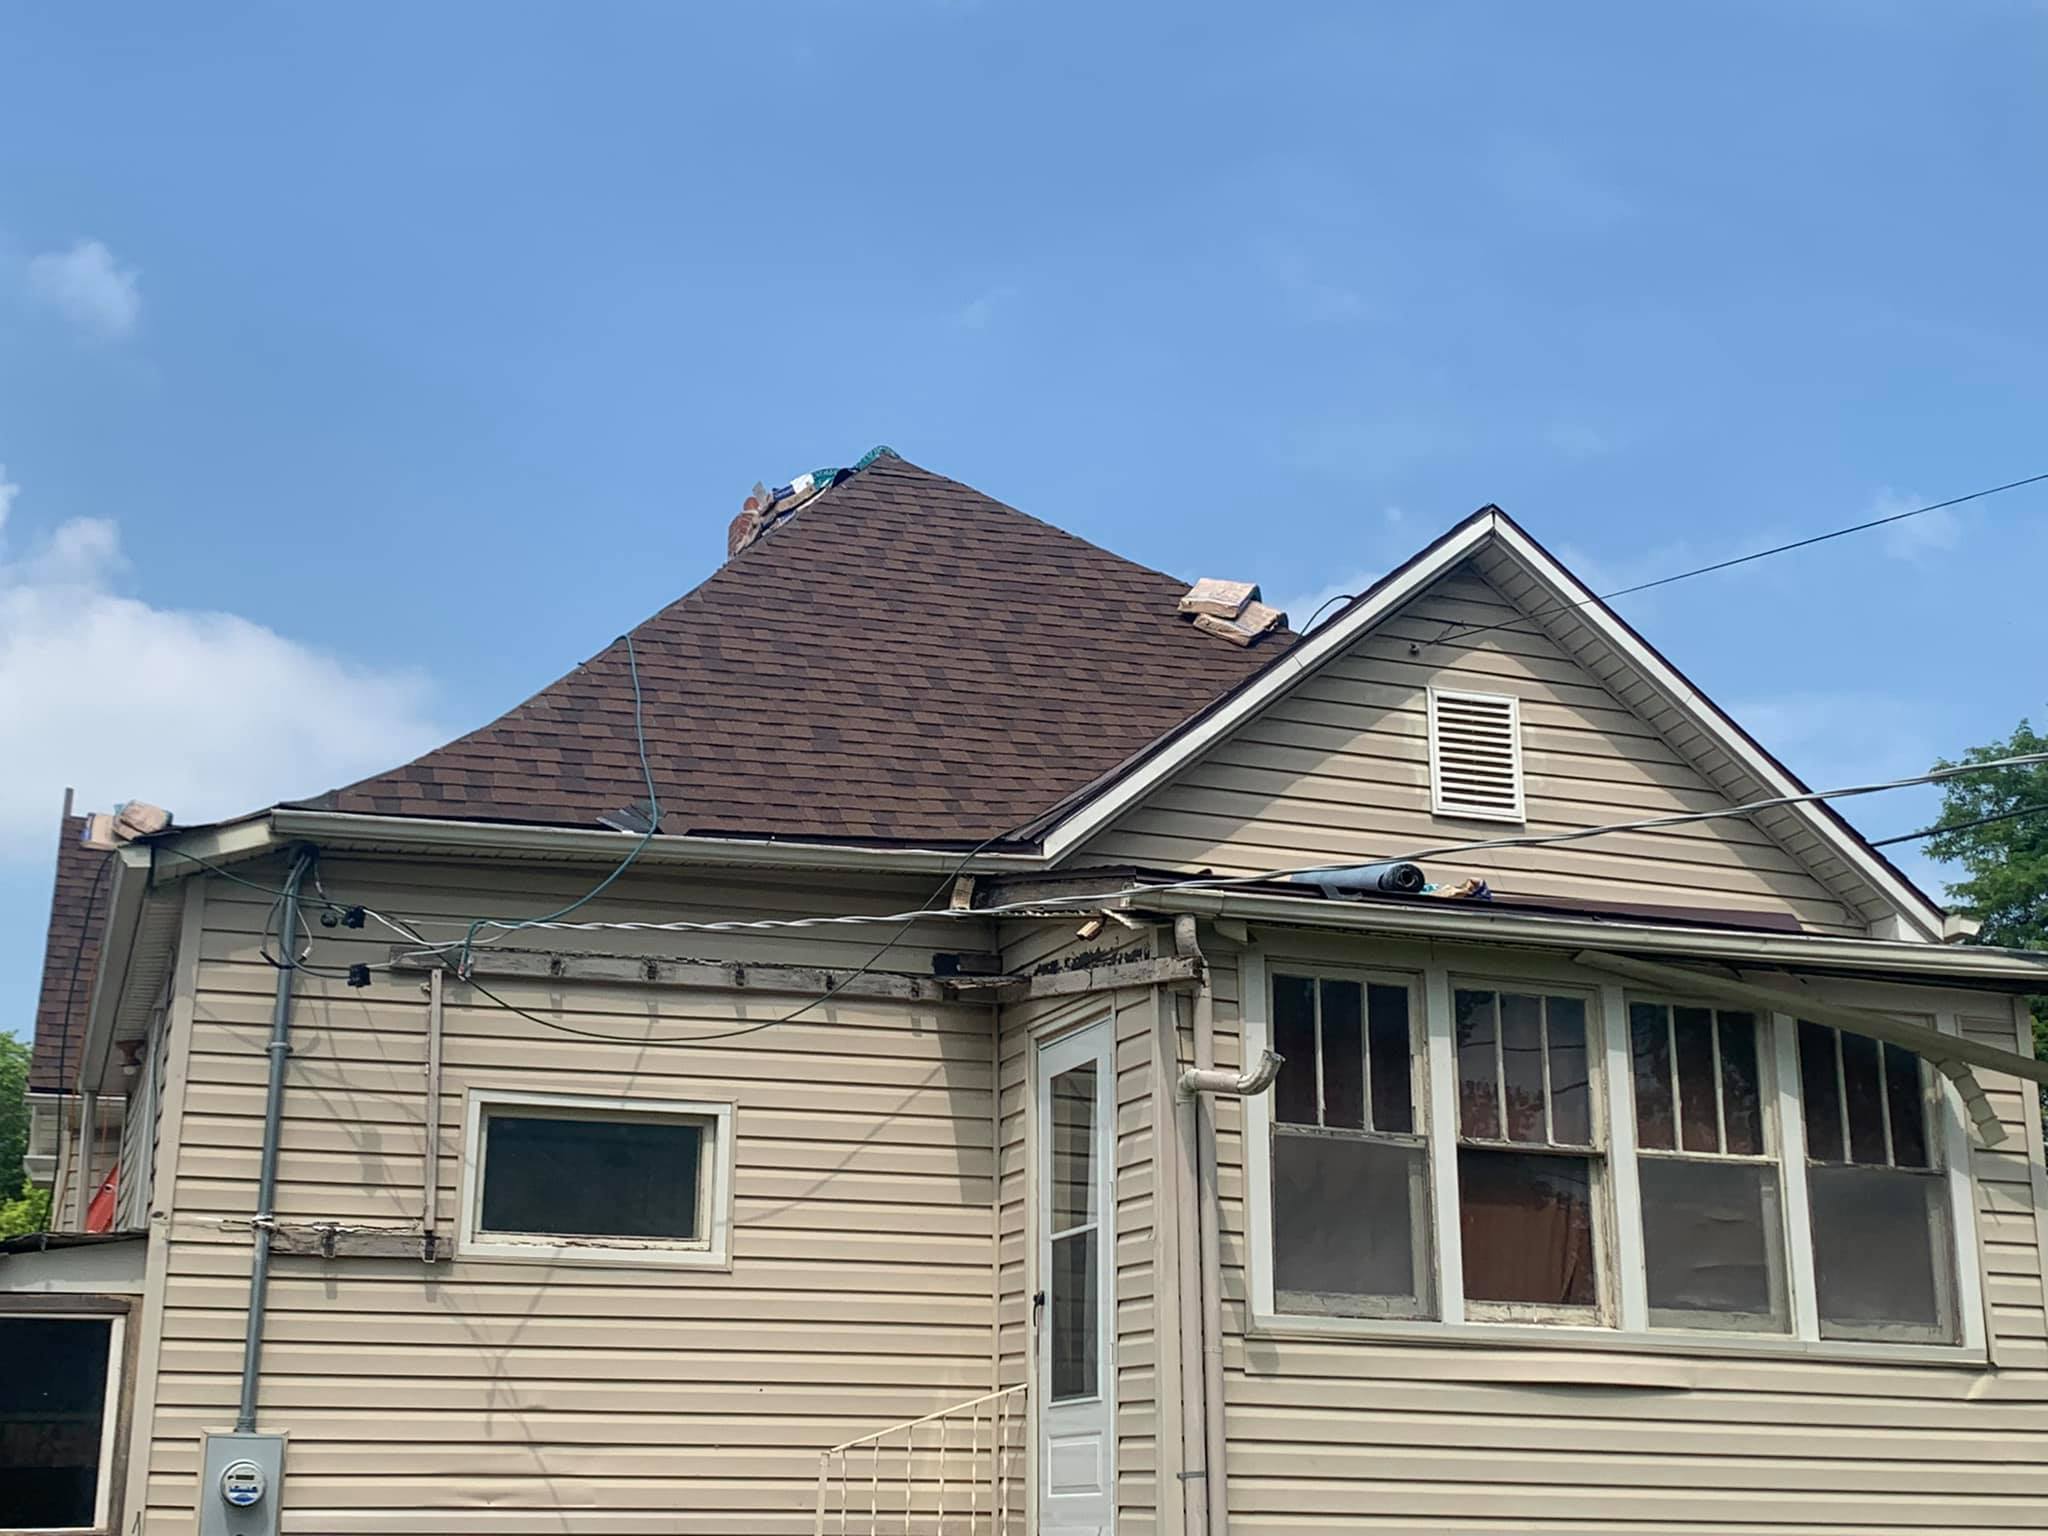 Roofing Companies Near Lansing Kansas - Finding The Right One